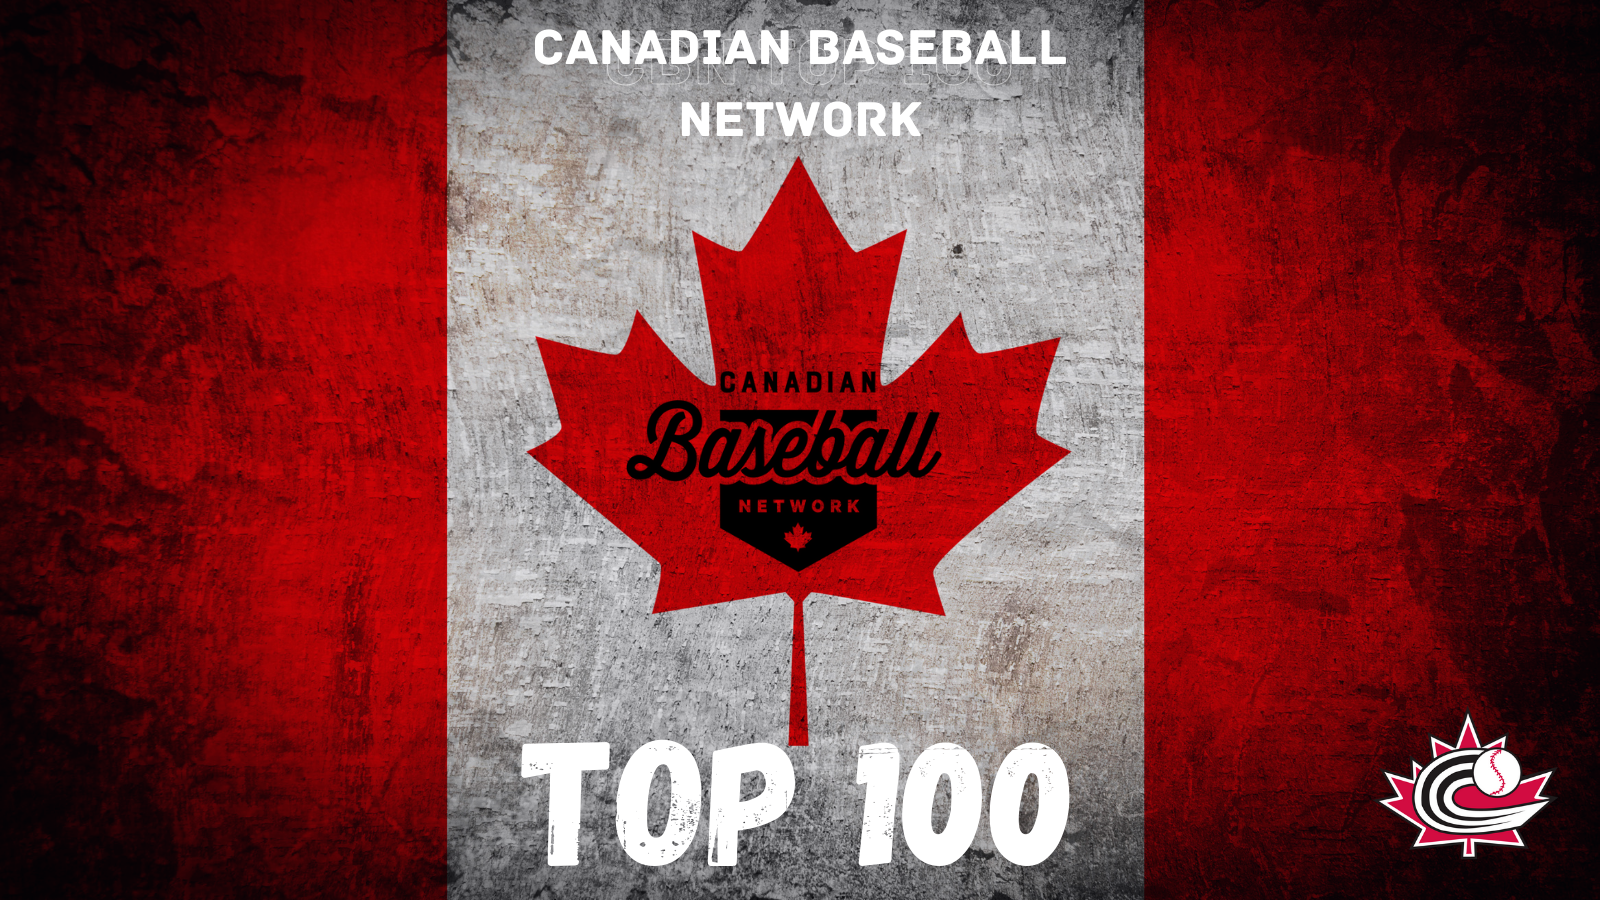 Baseball Canada ties to CBN Top 100 Most Influential Canadians in Baseball list